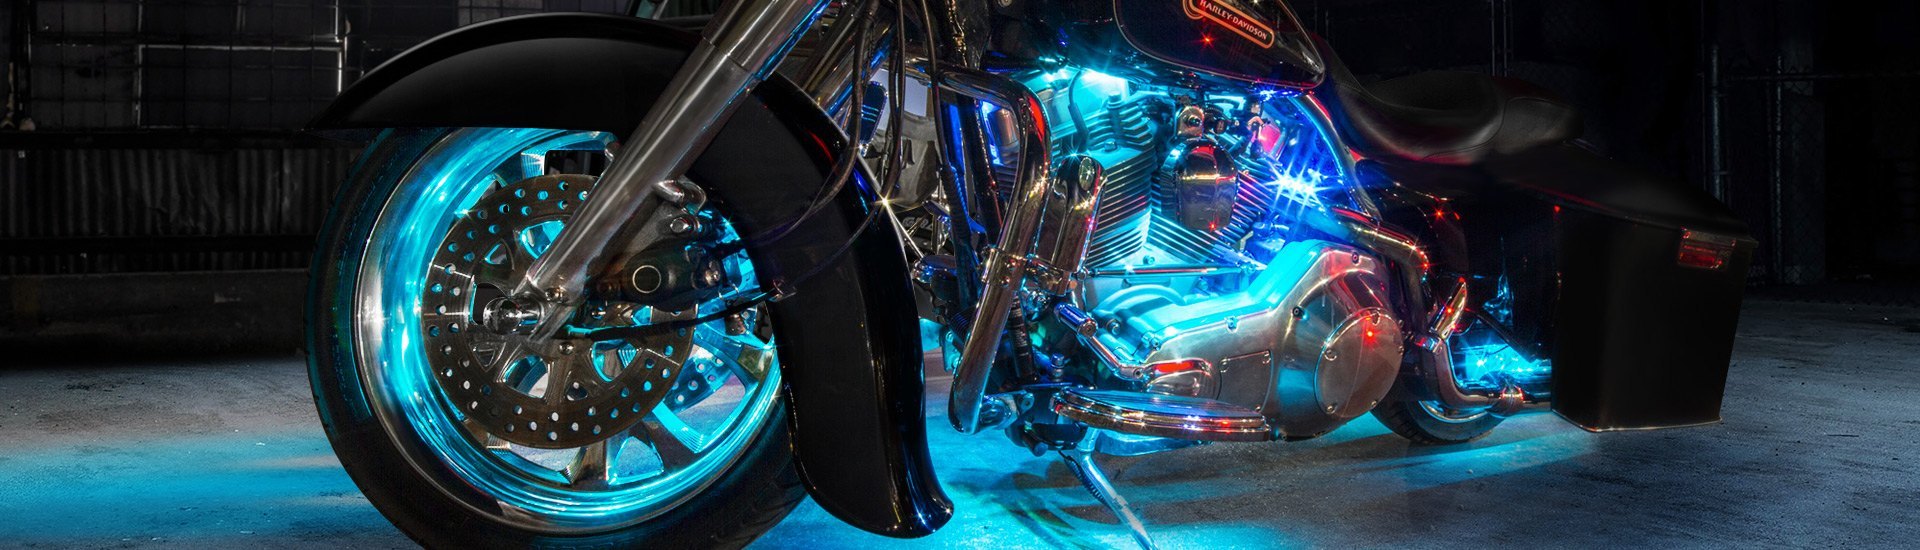 Motorcycle Accent Lights